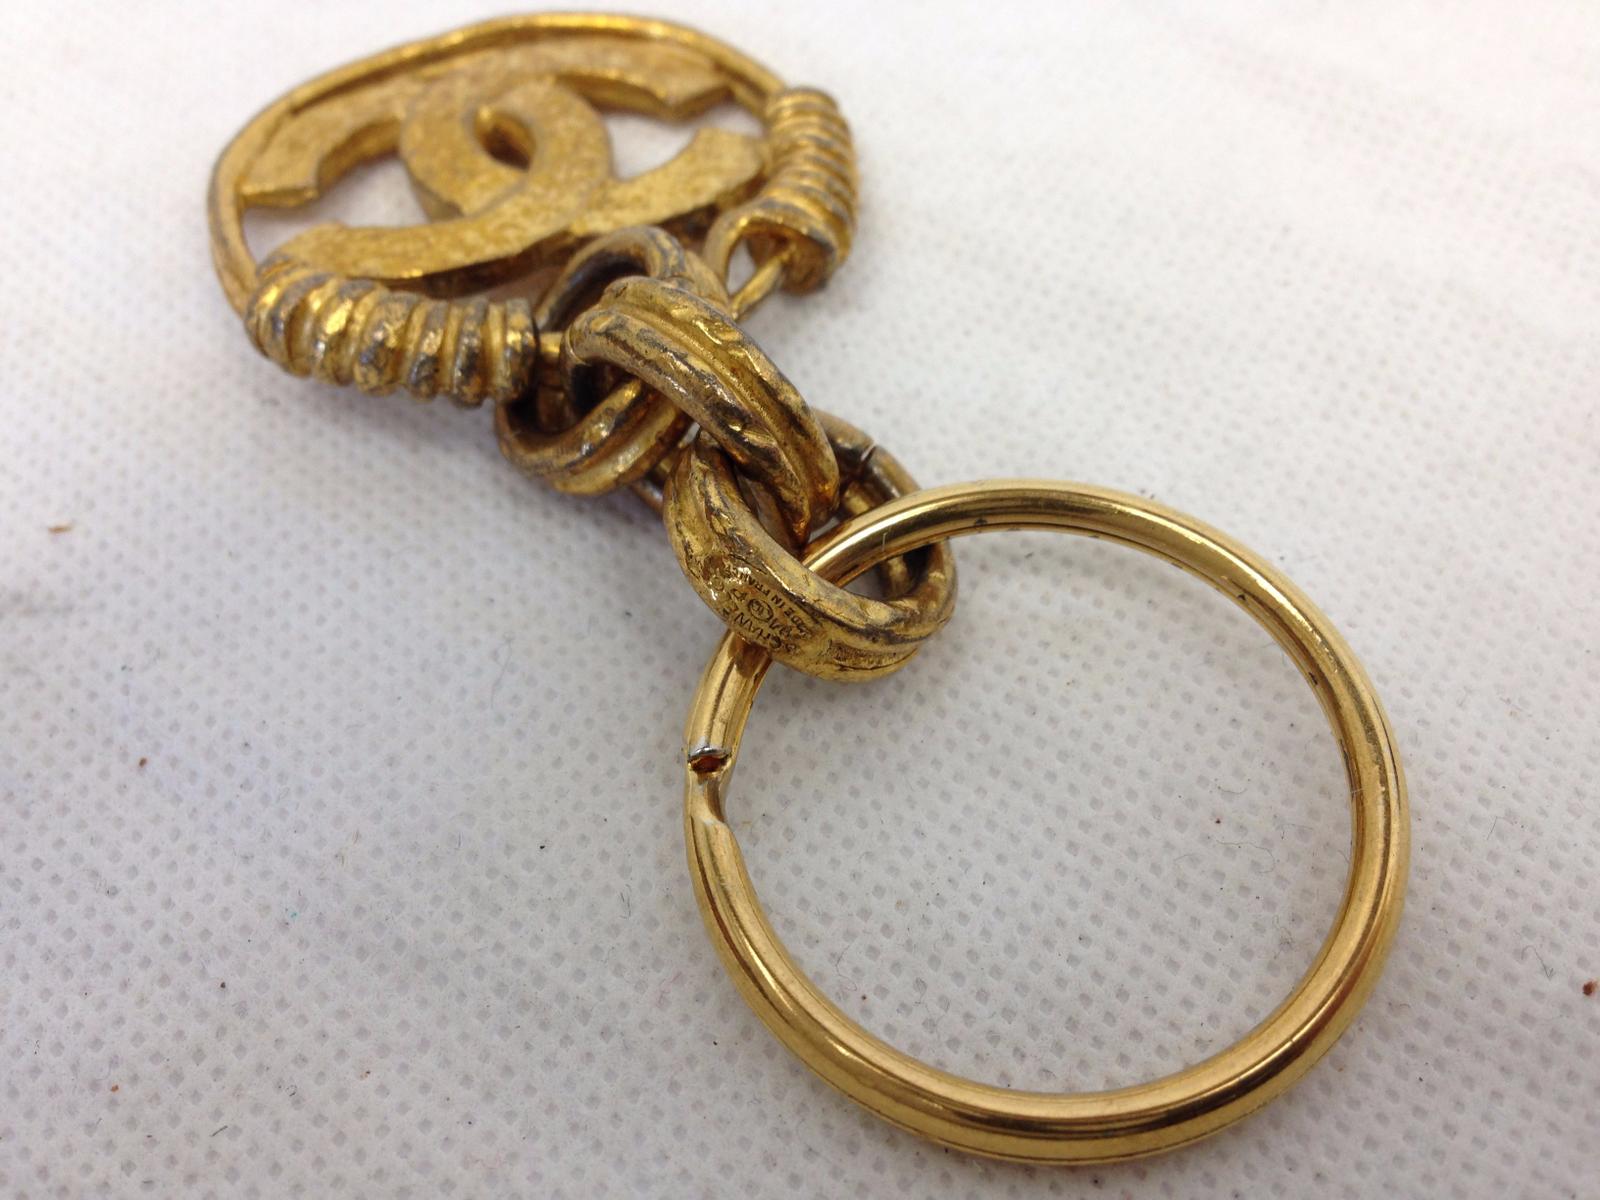 Auth CHANEL Vintage CC Logos Key Ring Holder Charm Gold Tone 6A120760# -  Tokyo Vintage Store